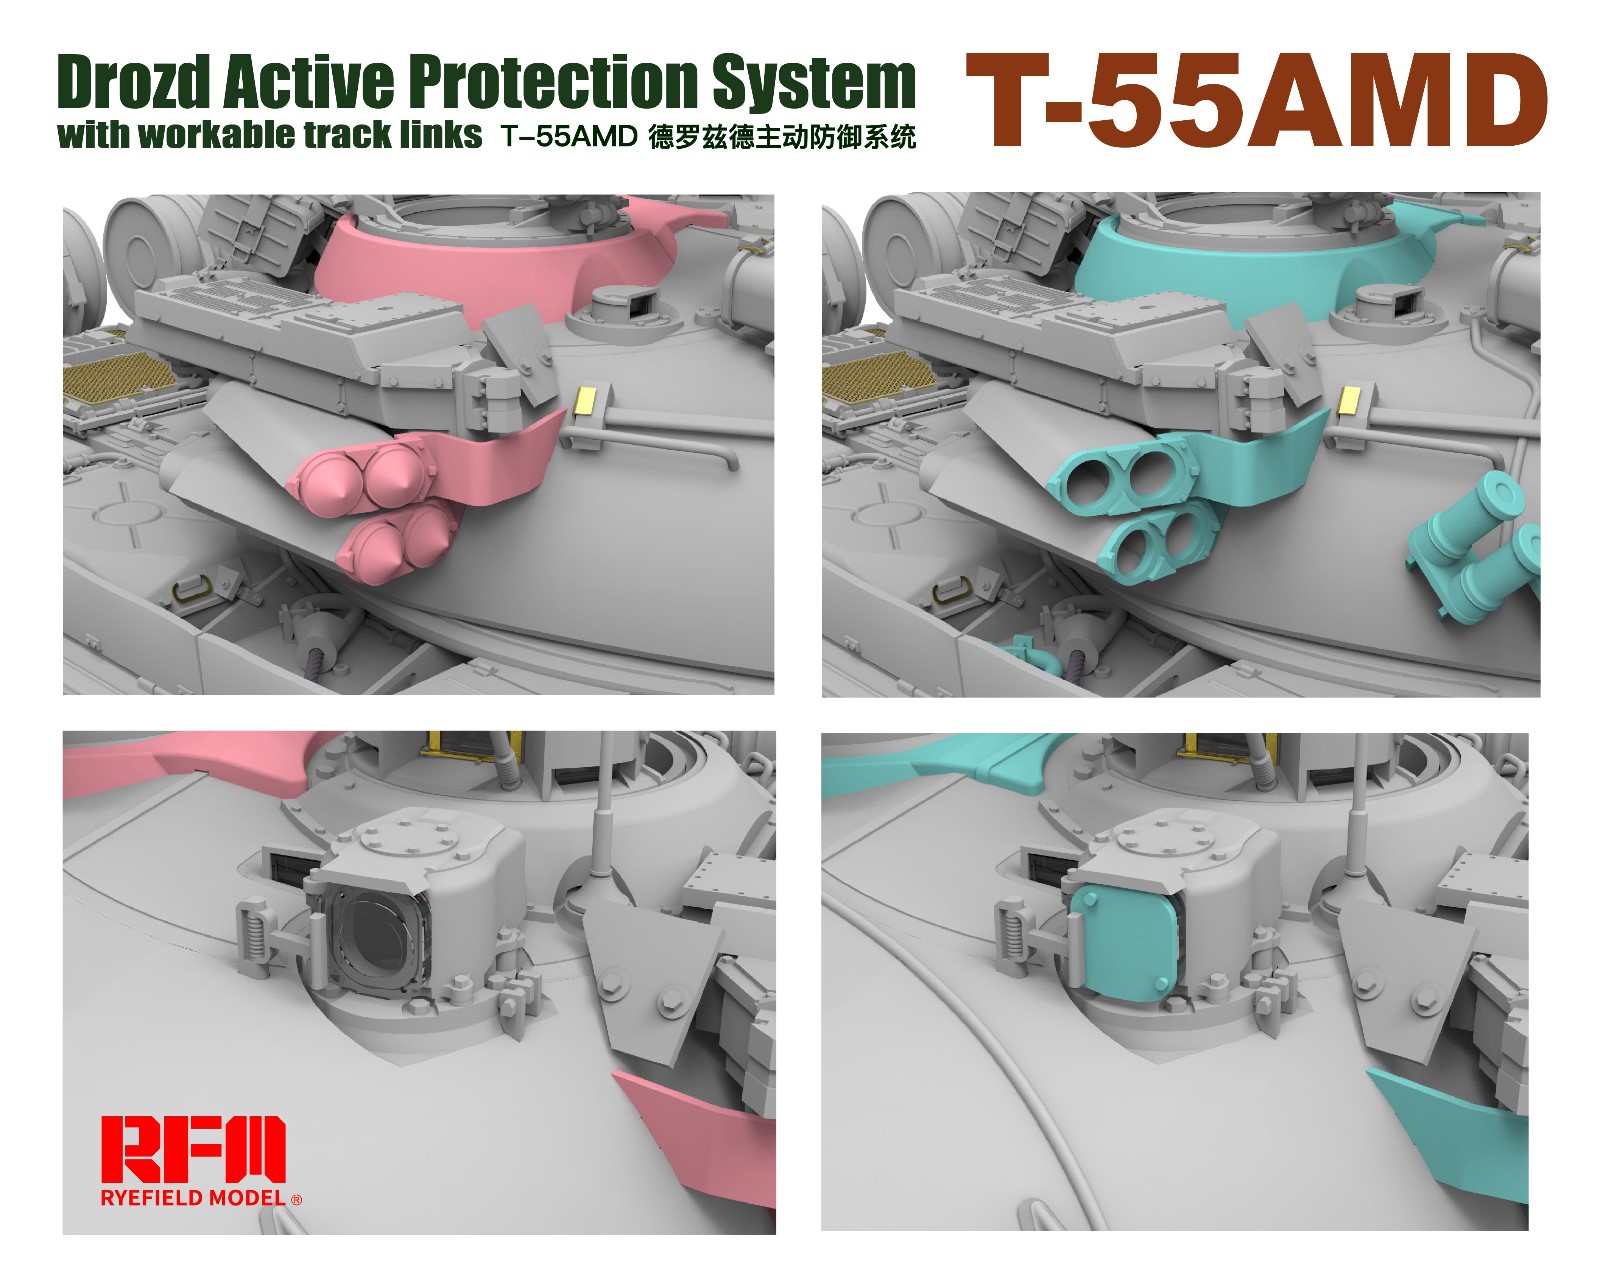 T-55AMD Drozd Active Protection System with workable tracks